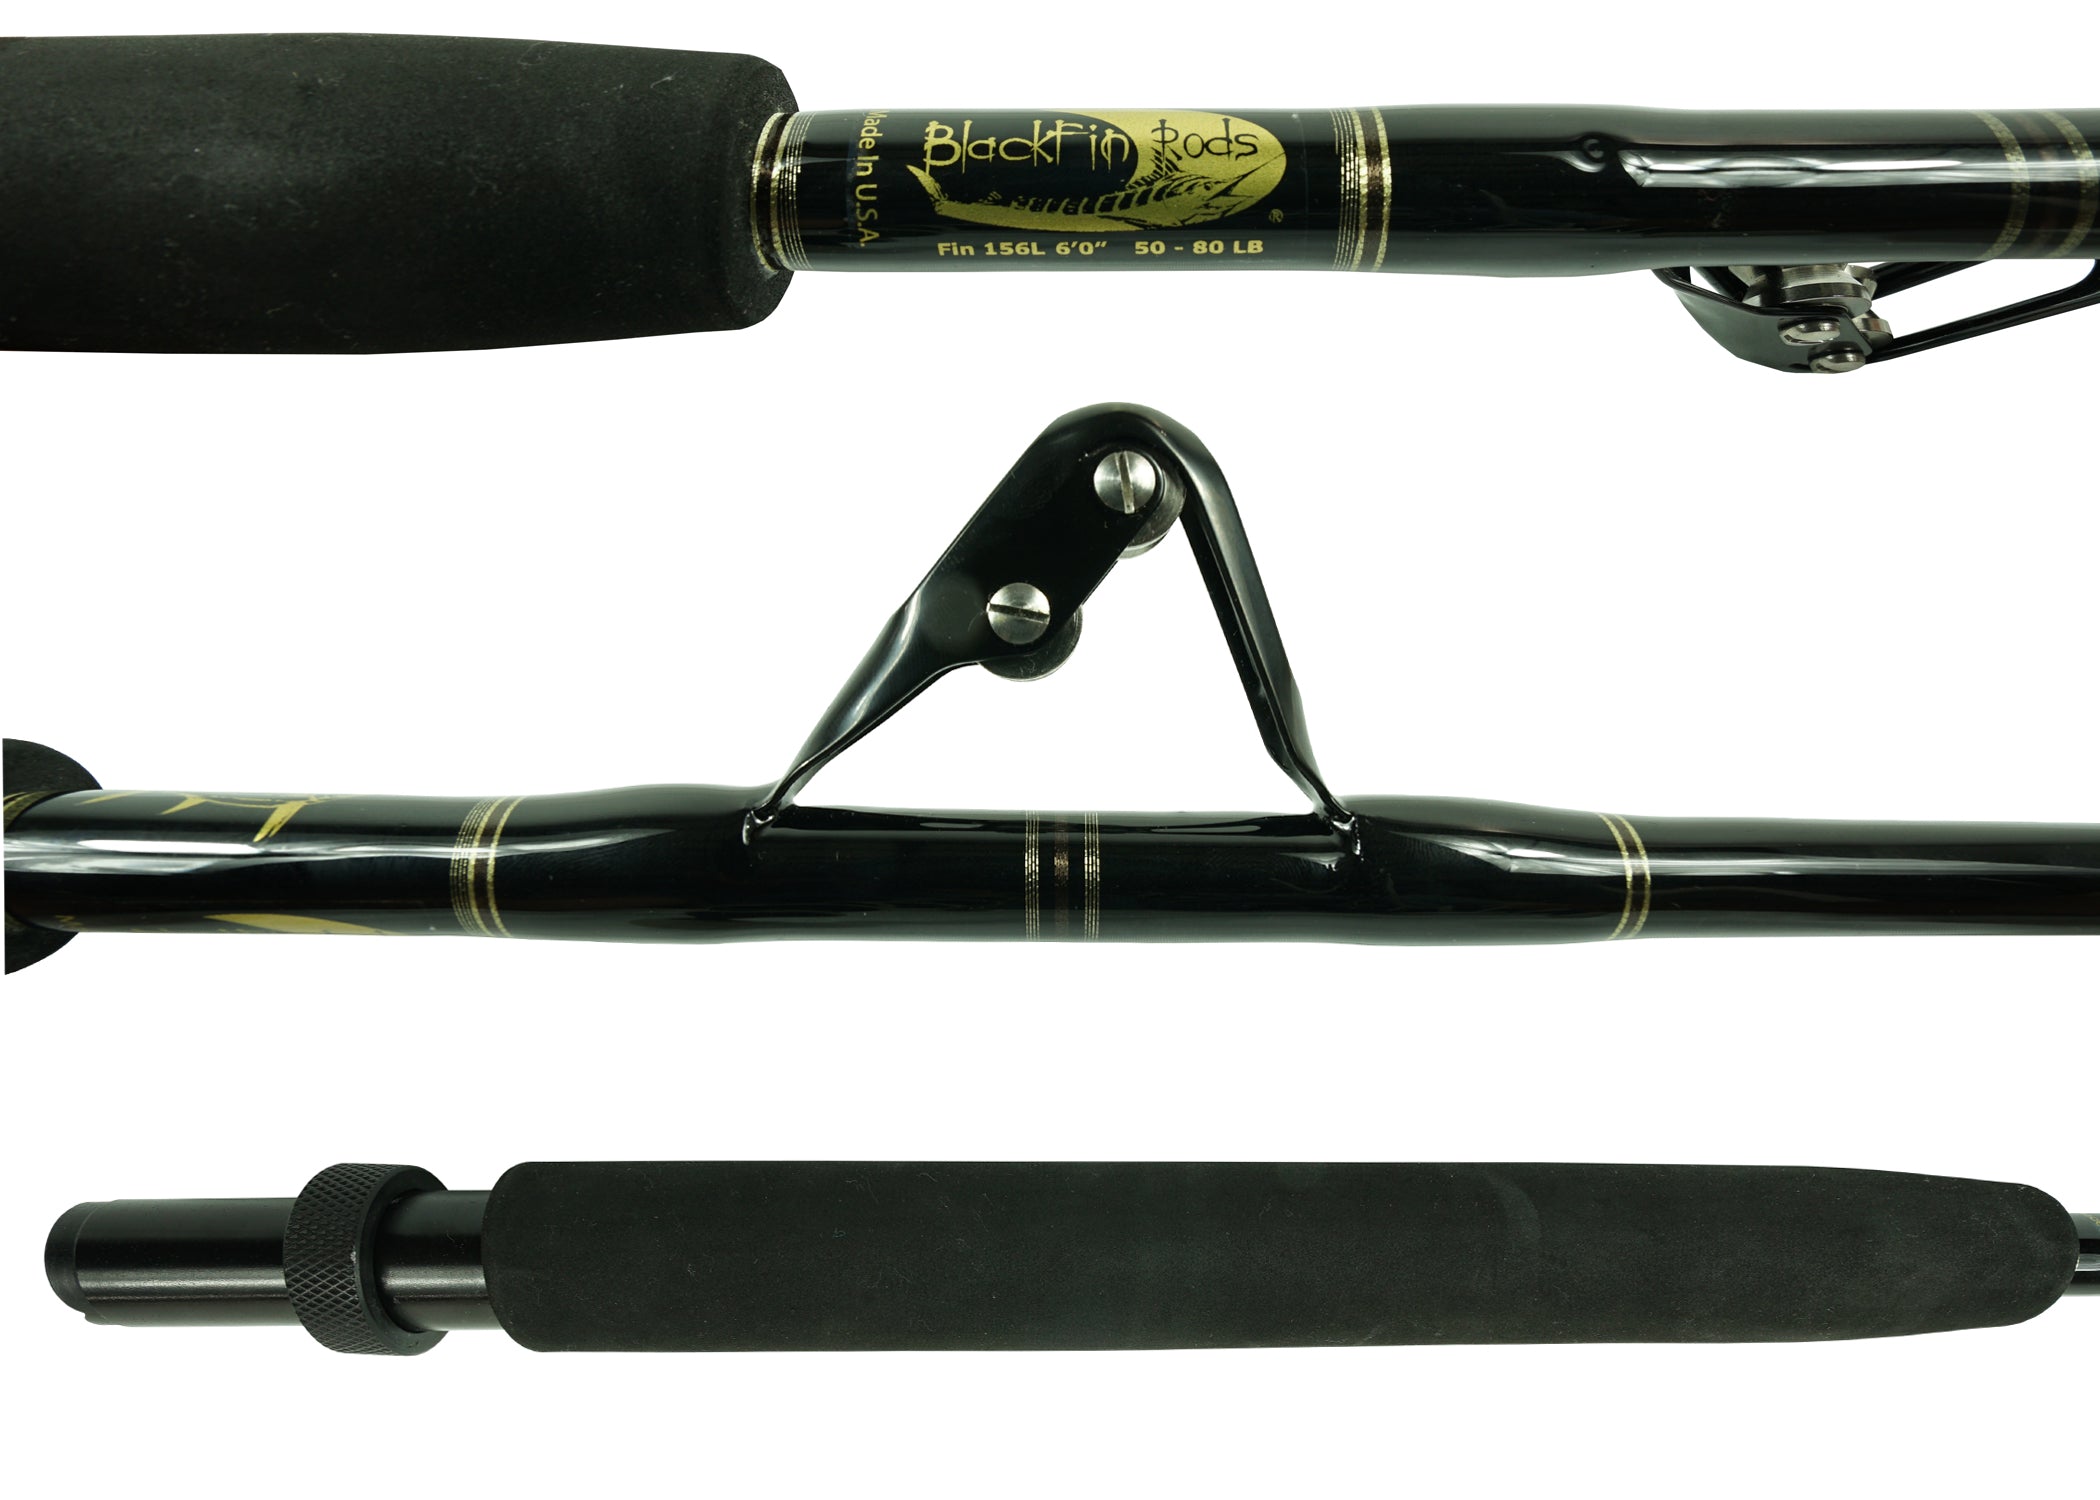 Blackfin Rods Fin 156L 6'0 Stand Up Fishing Rod 50-80lb